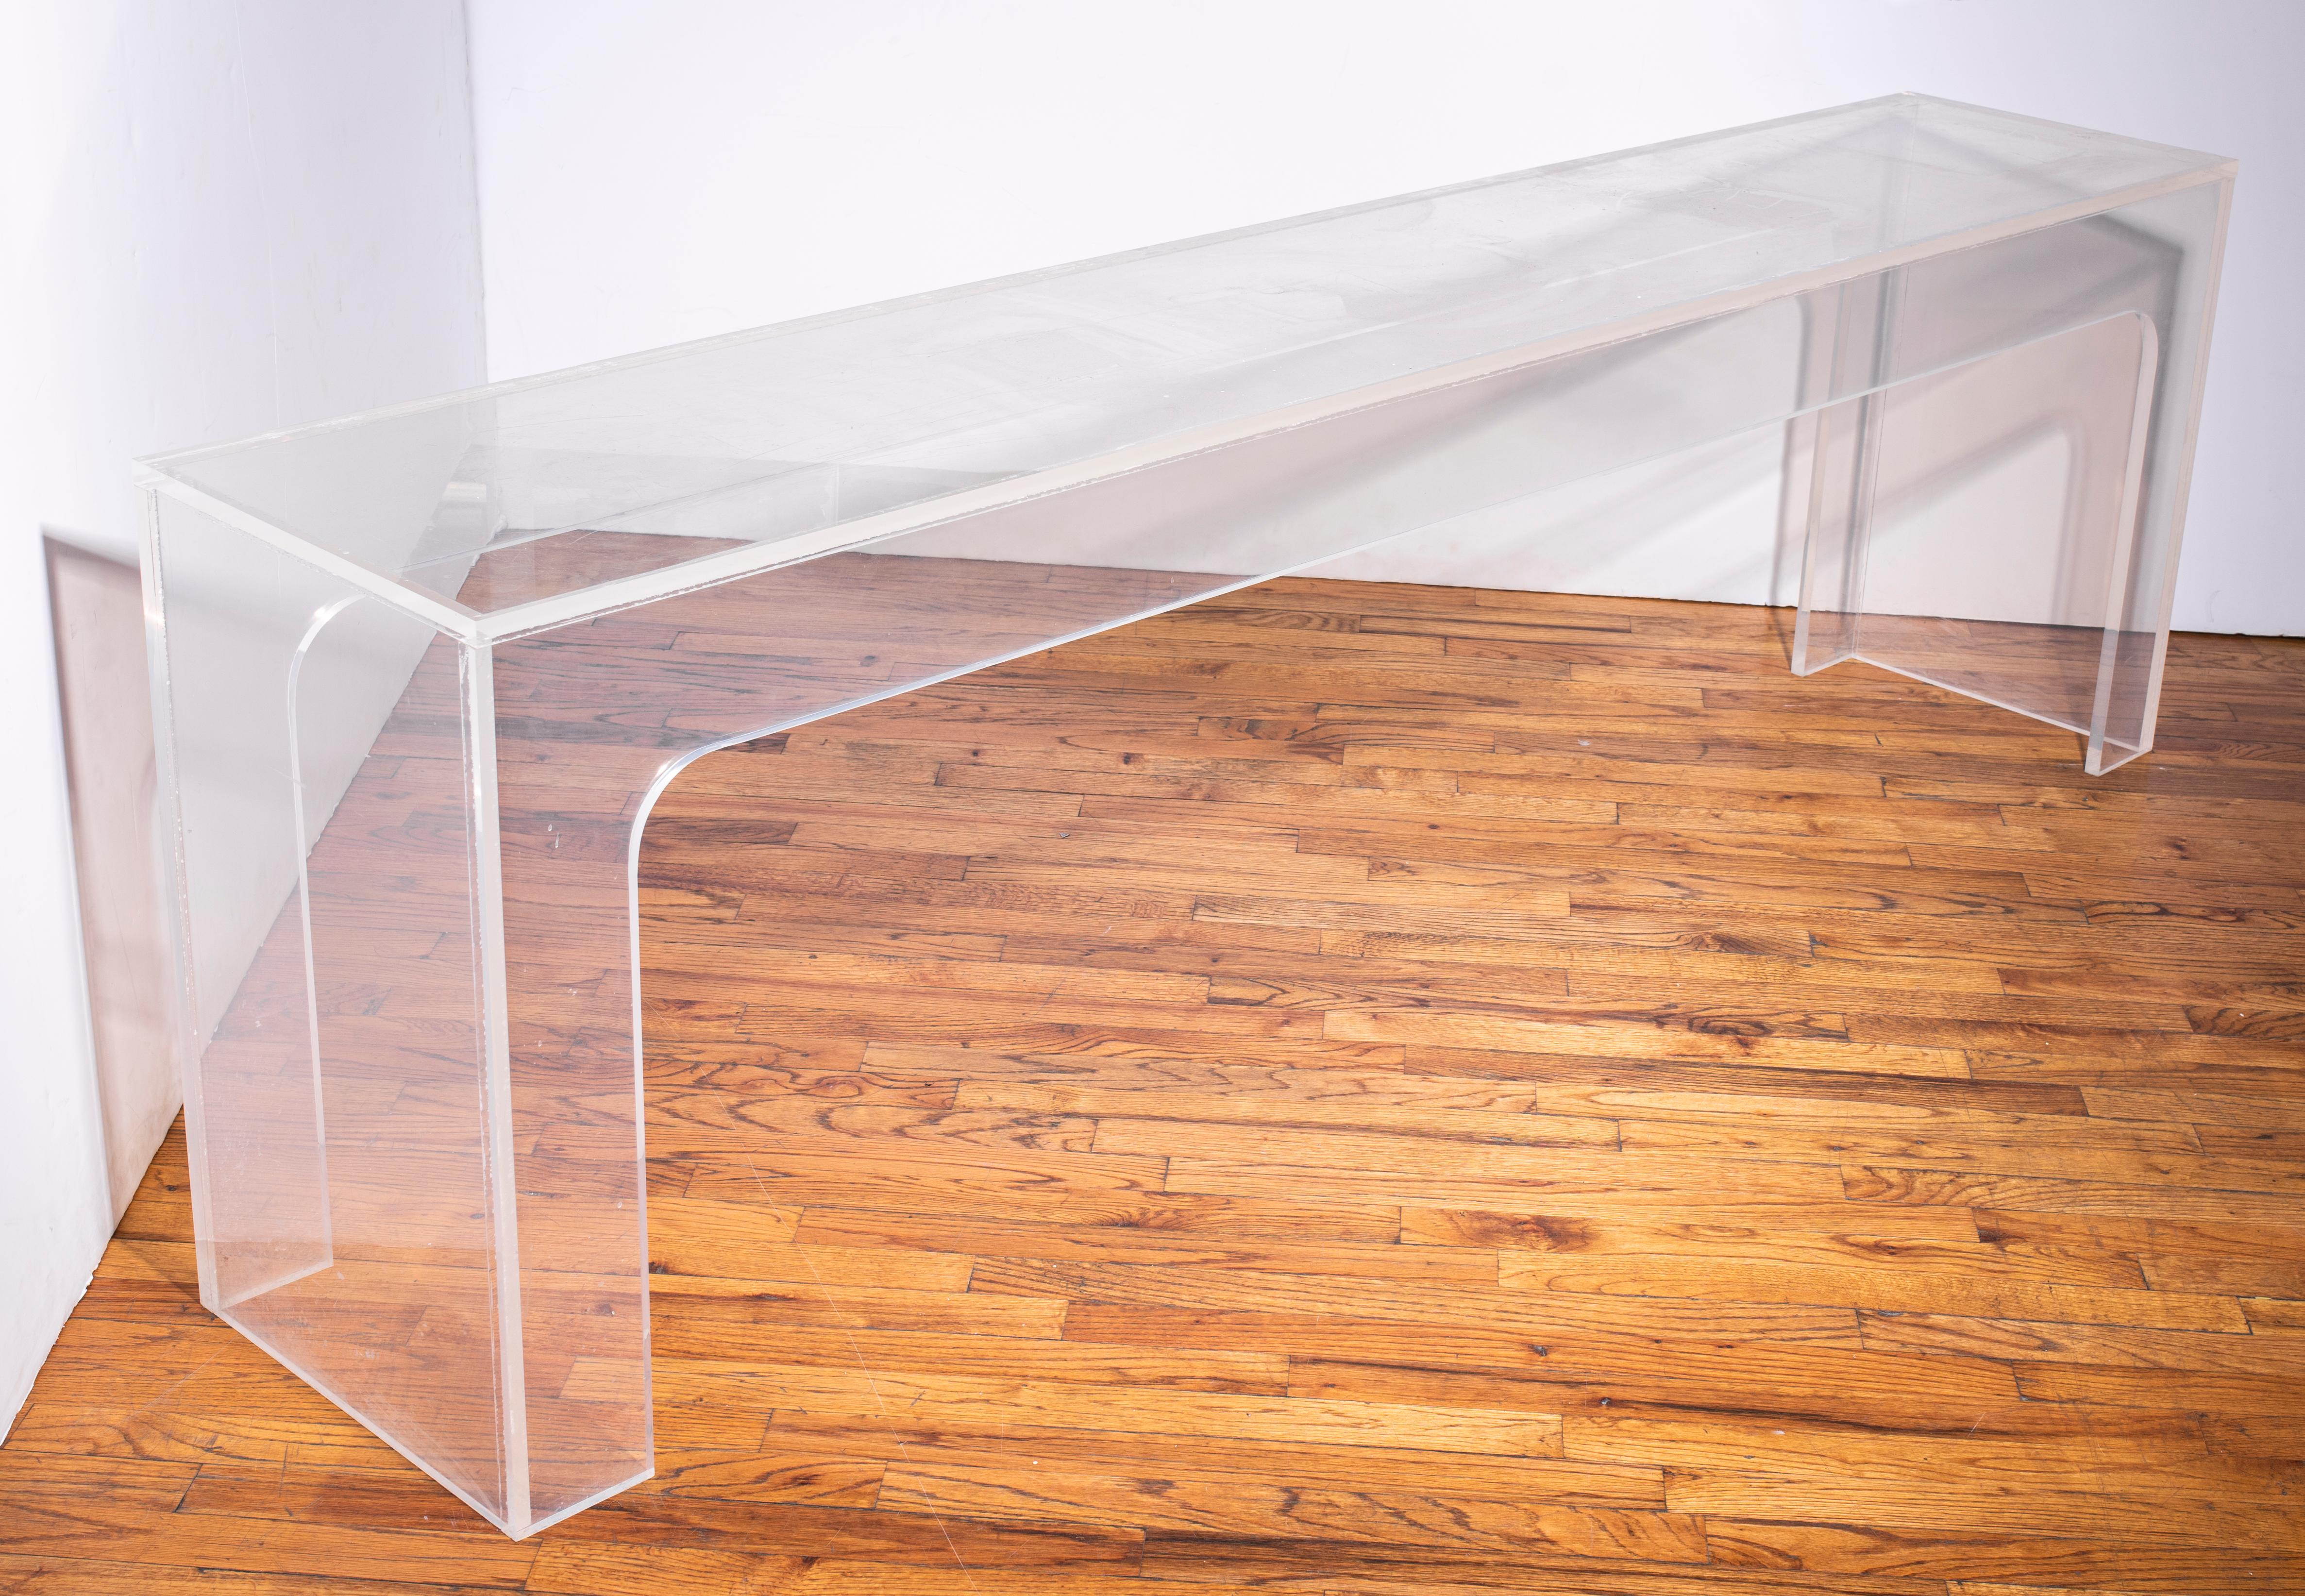 Modern clear Lucite console table, circa 1970s. In great vintage condition with age-appropriate wear and minor surface scratches to the top.